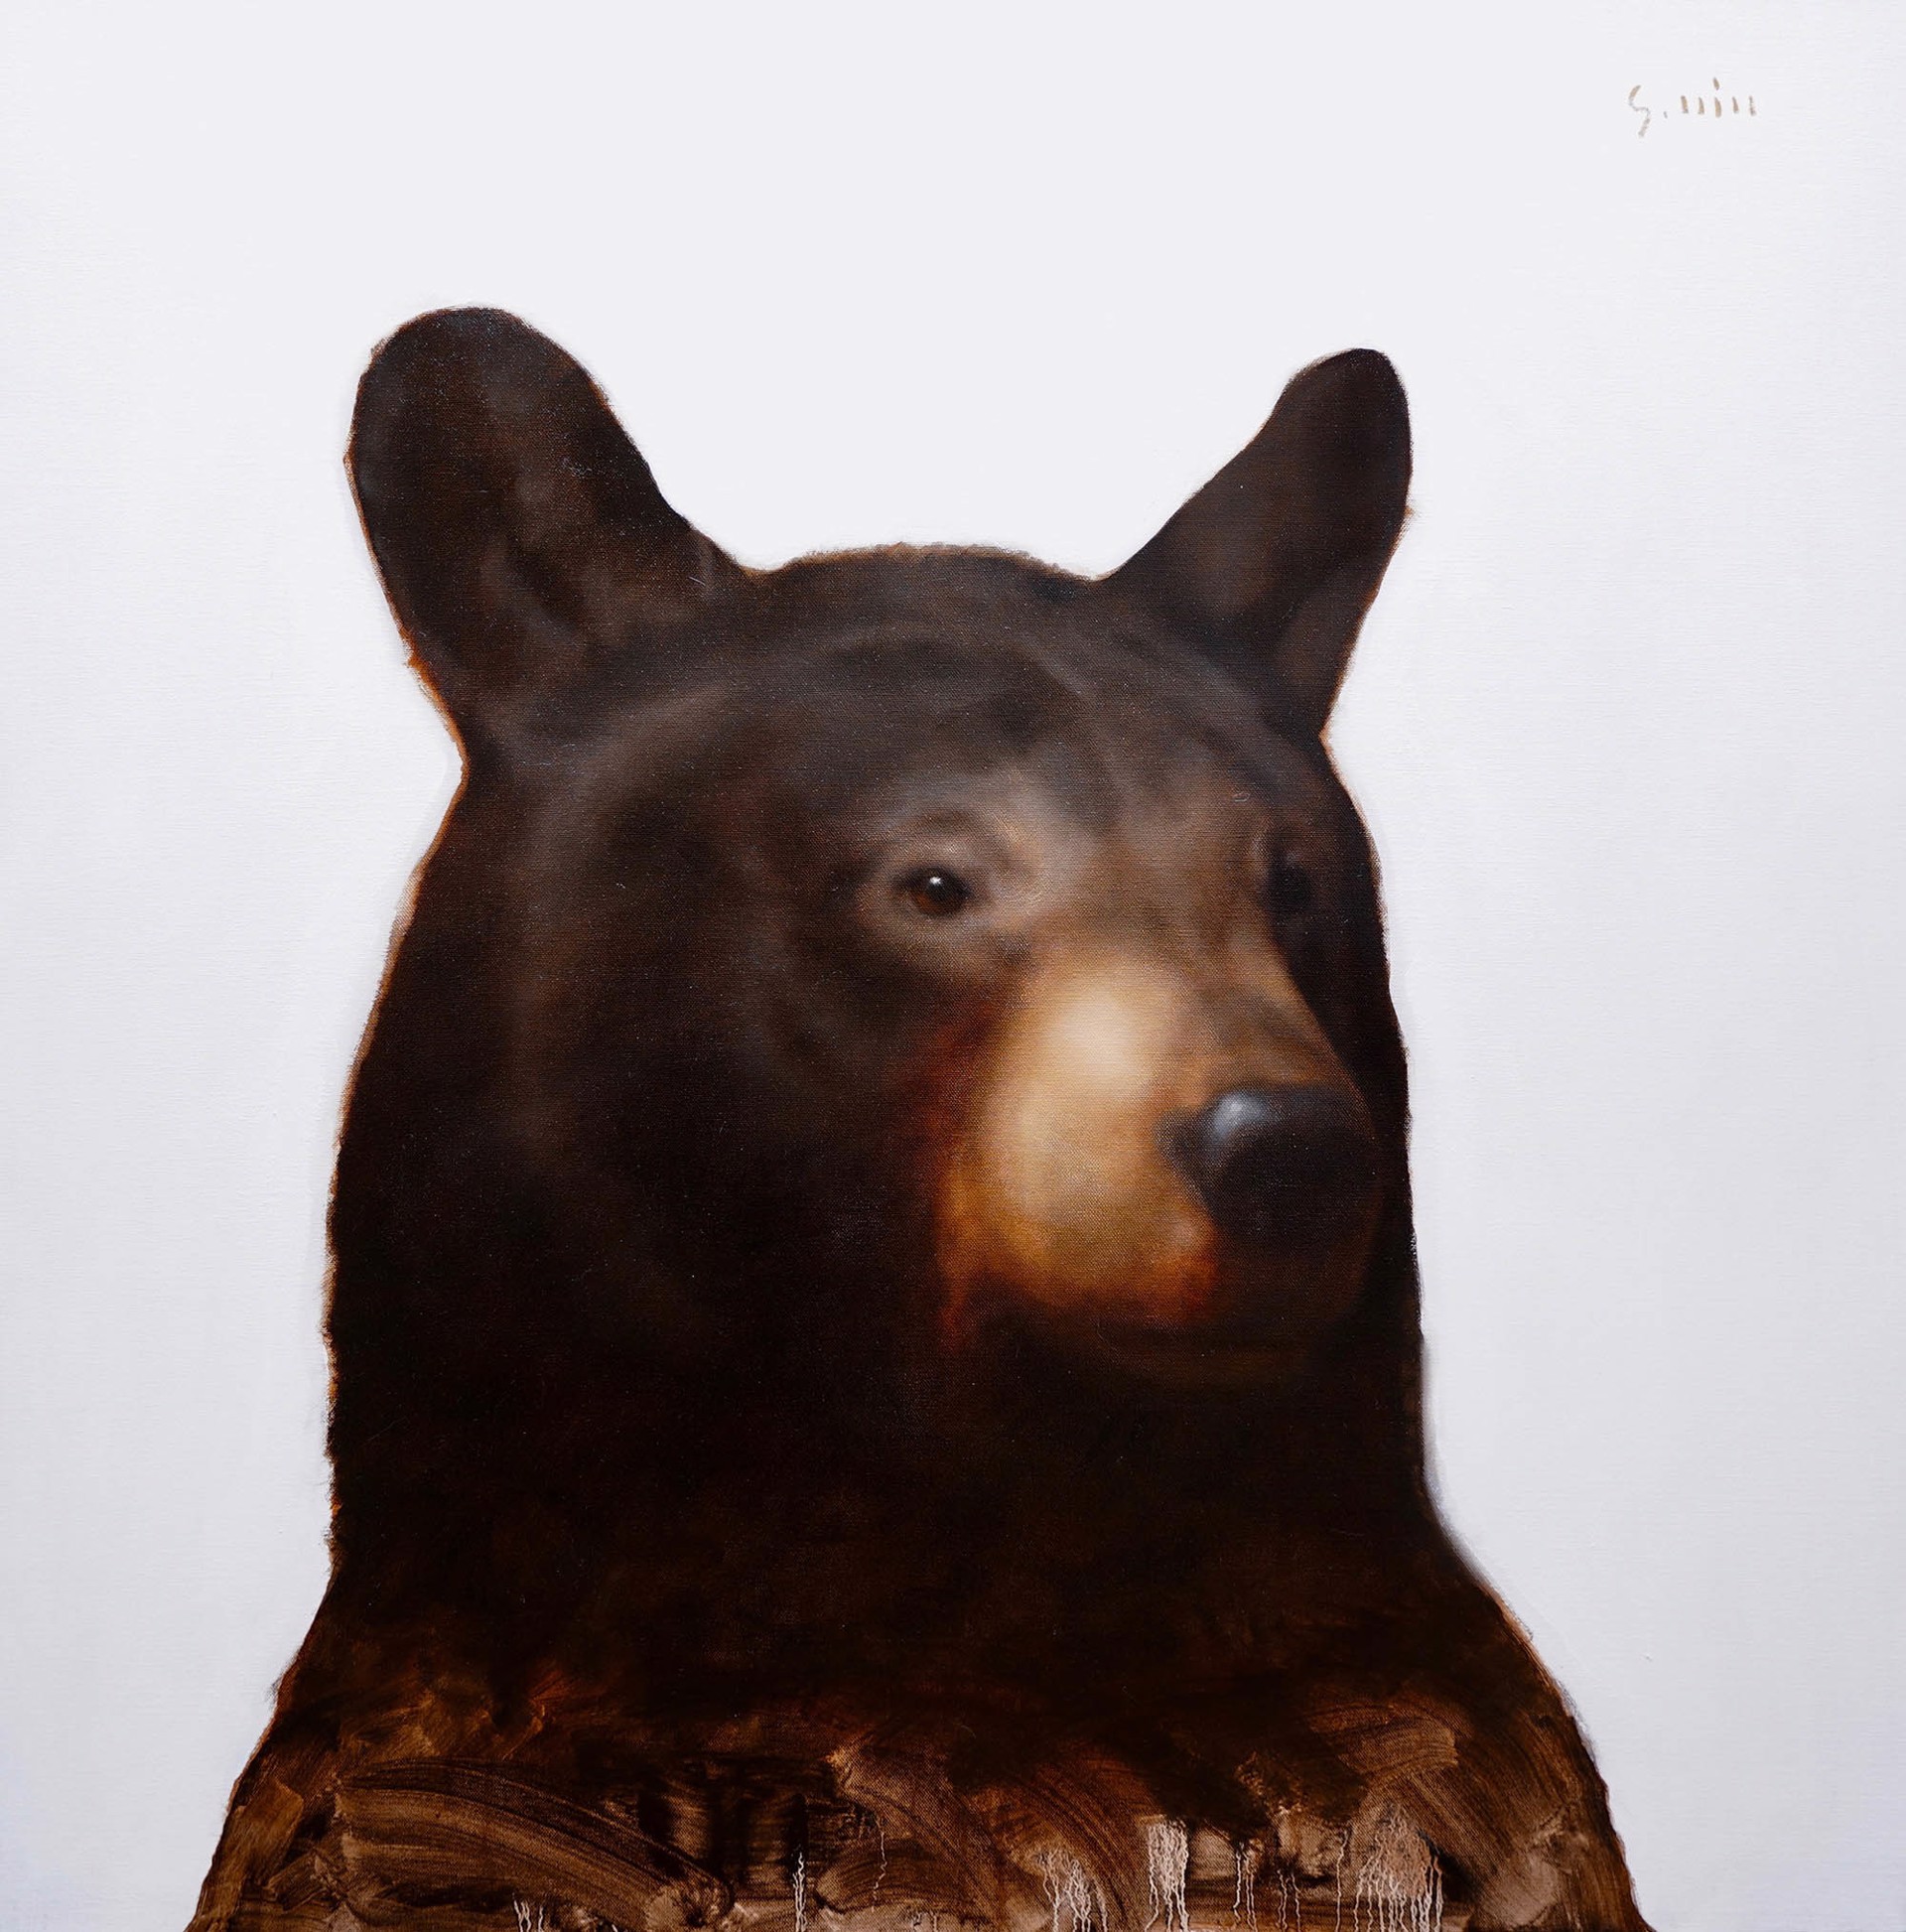 Original Oil Painting Featuring A Black Bear Portrait On White Background